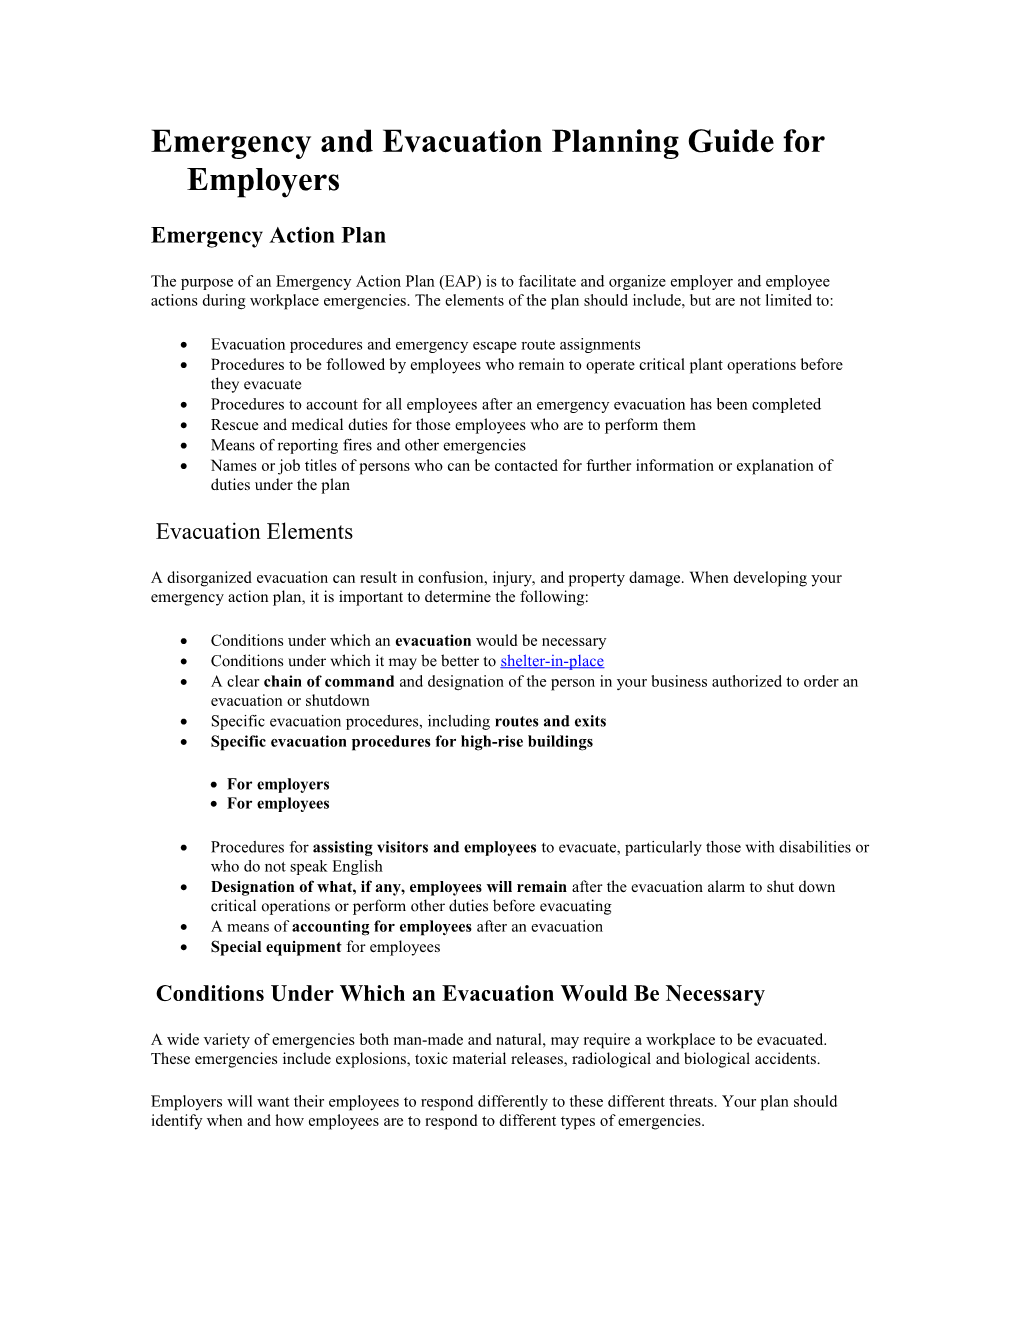 Emergency and Evacuation Planning Guide for Employers